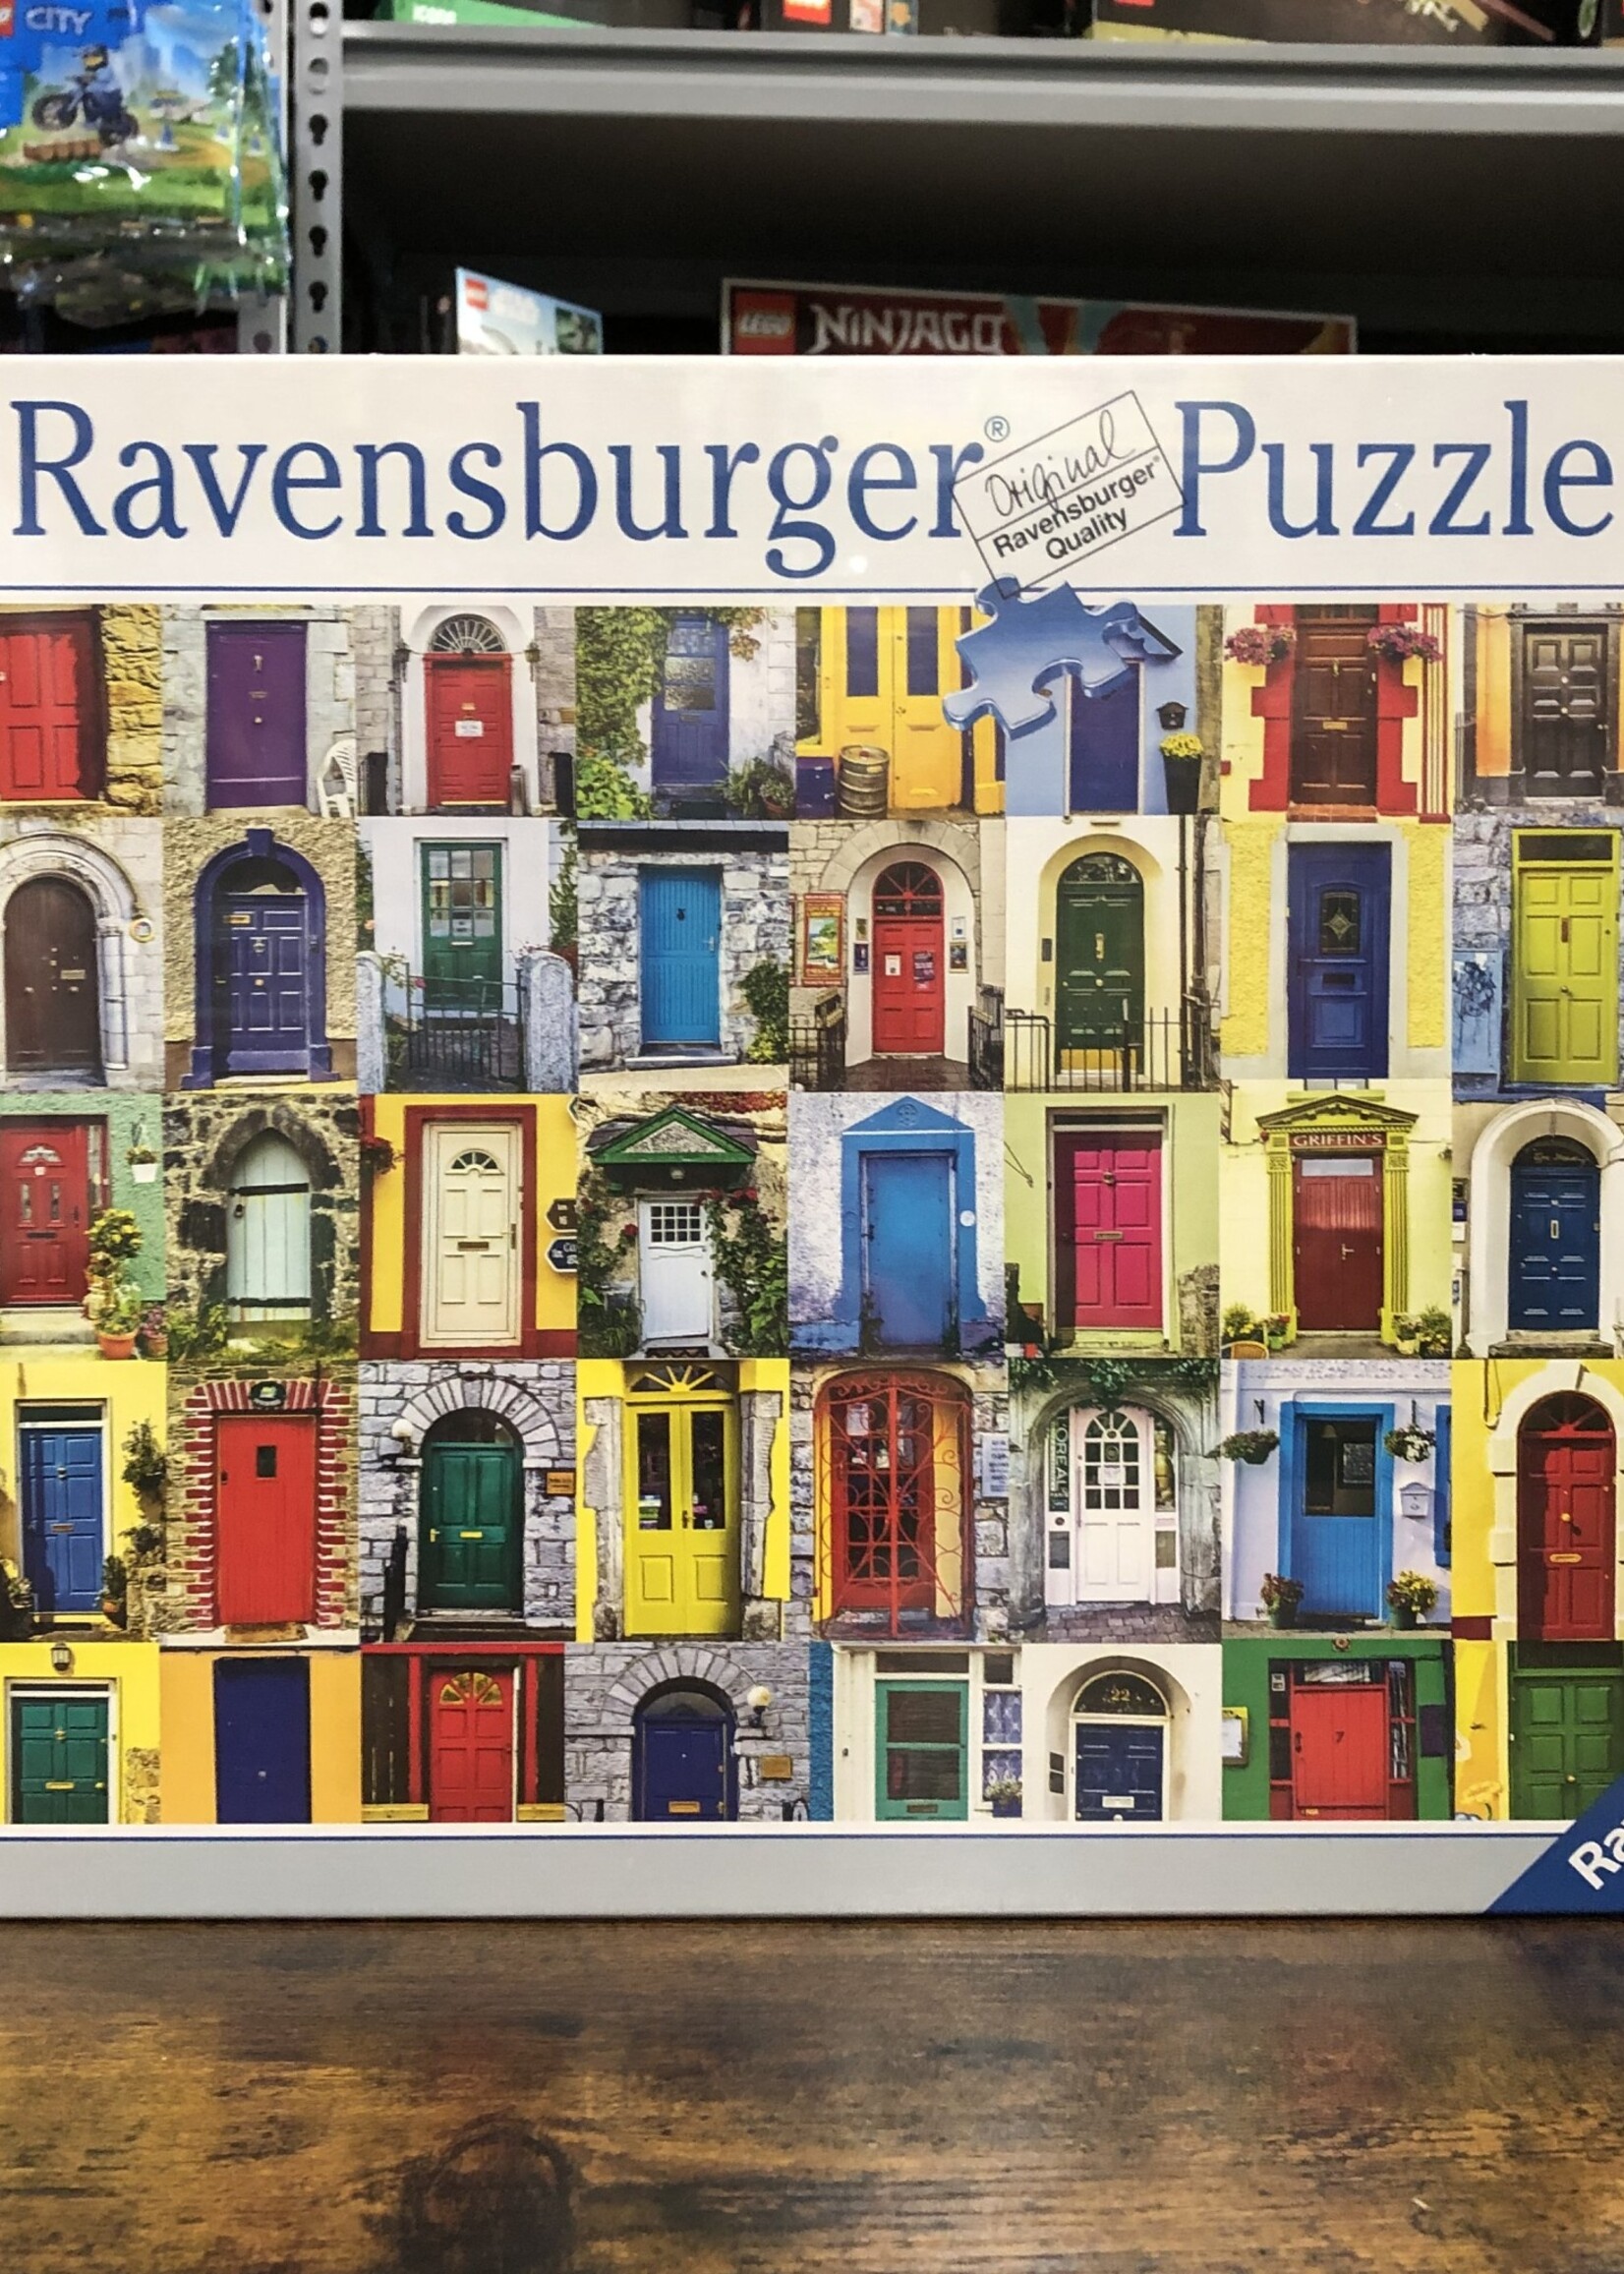 Ravensburger Puzzle - Doors of the World 1000 Pc.